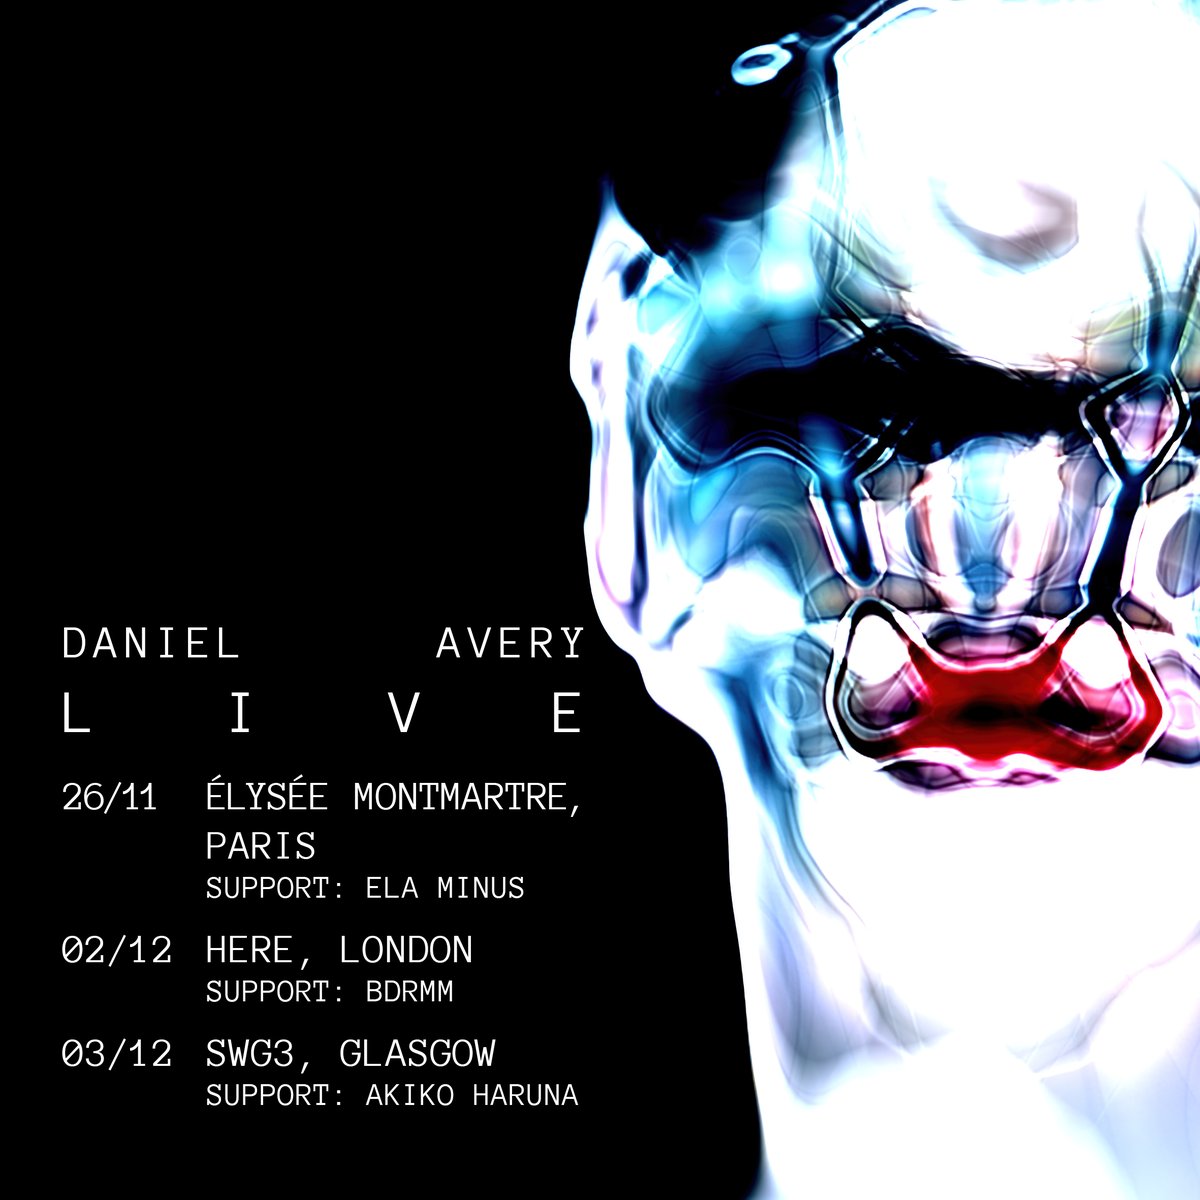 With one month to go until the live shows I’m gassed to announce the incredible support acts joining me: 26/11 Paris - Ela Minus 02/12 London - bdrmm 03/12 Glasgow - Akiko Haruna Doors will be around 7pm - a burst of intense joy straight into your minds. danielavery.komi.io